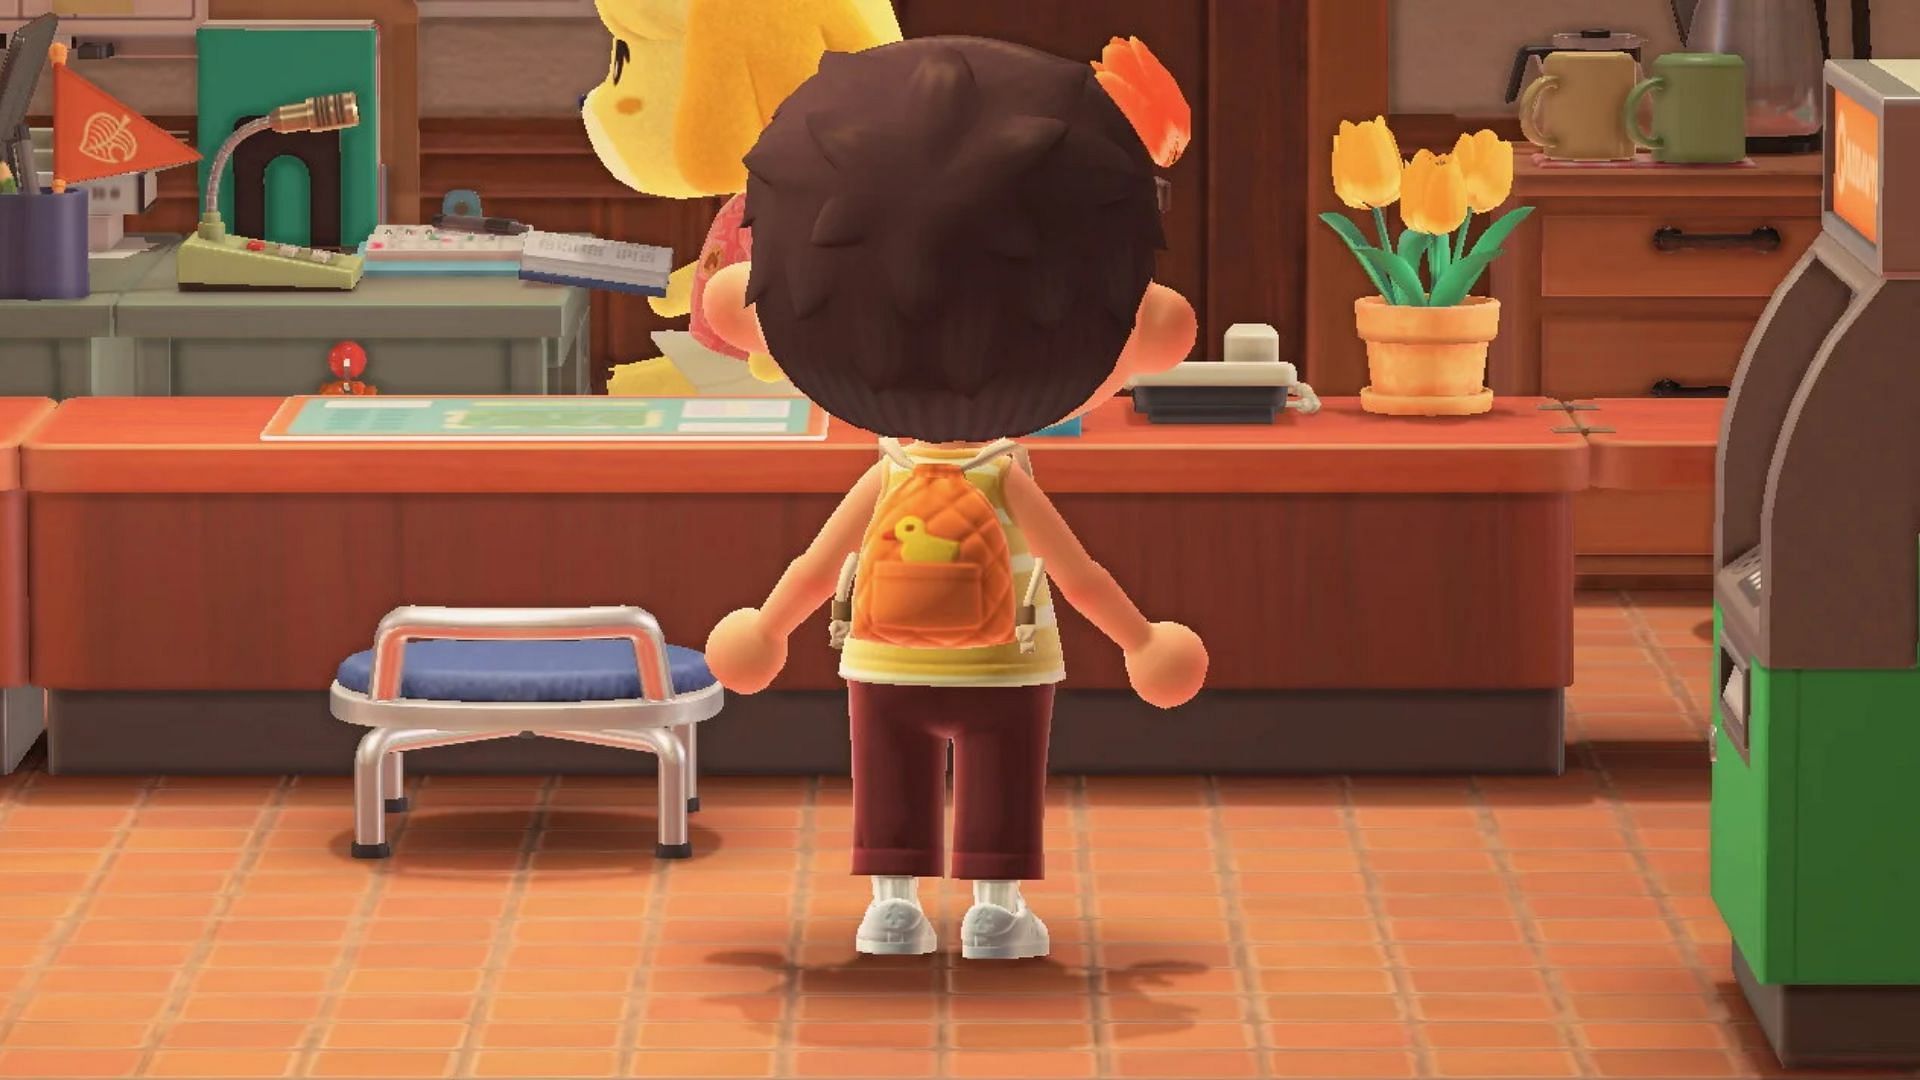 Animal Crossing: New Horizons players can get their hands on a Knapsack (Image via r/AnimalCrossing/Reddit)